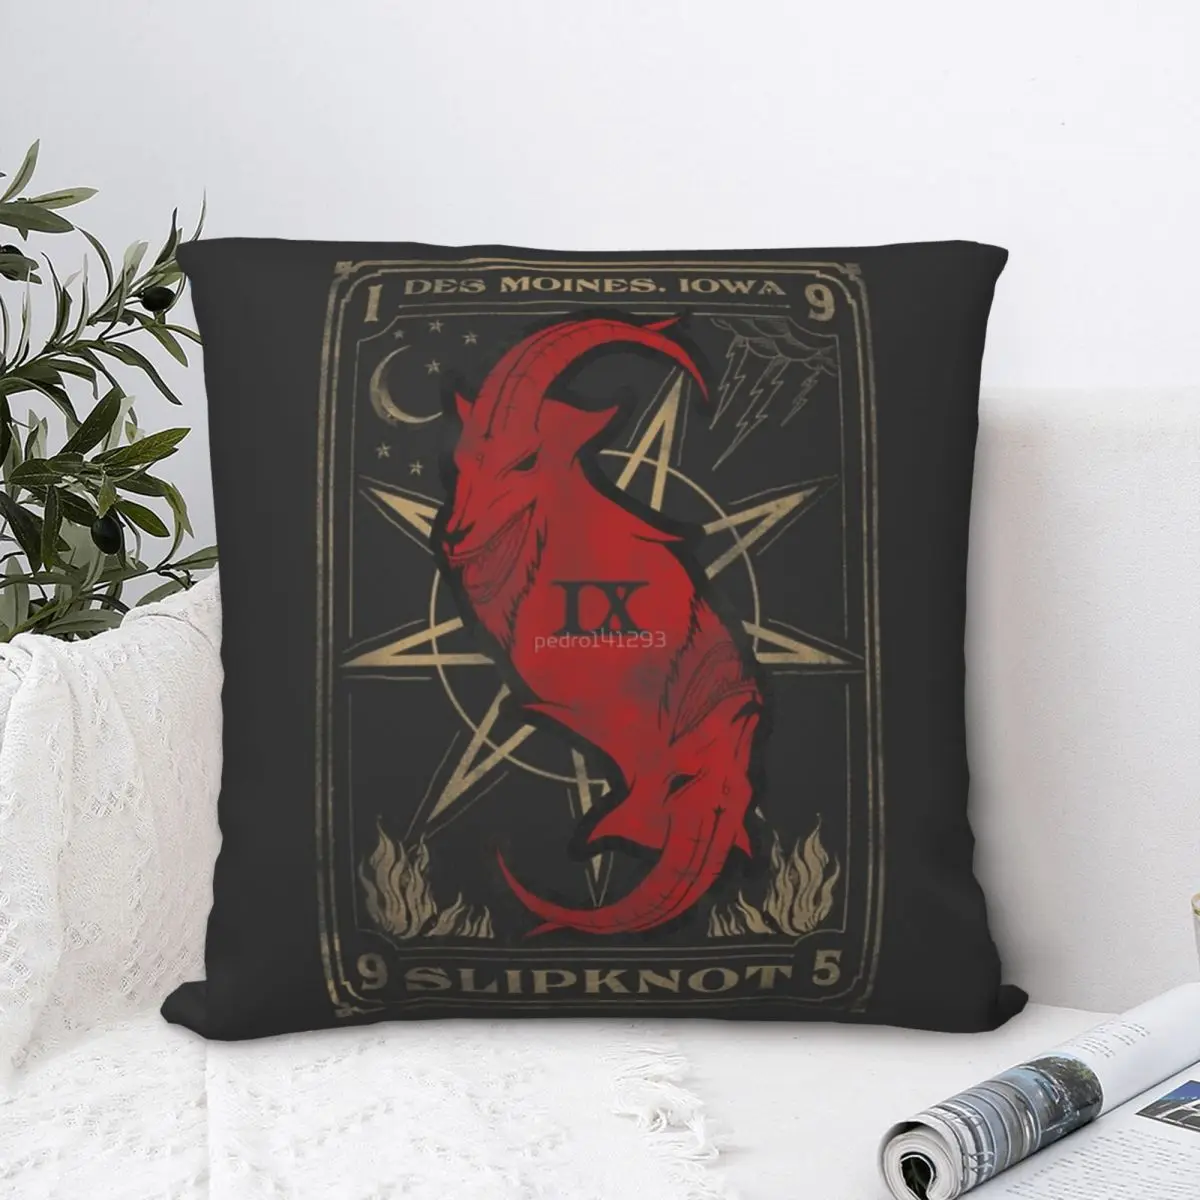 Tarot Card Goat Square Pillowcase Polyester Pillow Cover Velvet Cushion Zip Decorative Comfort Throw Pillow For Home Car x smile square pillowcase polyester pillow cover velvet cushion zip decorative comfort throw pillow for home car